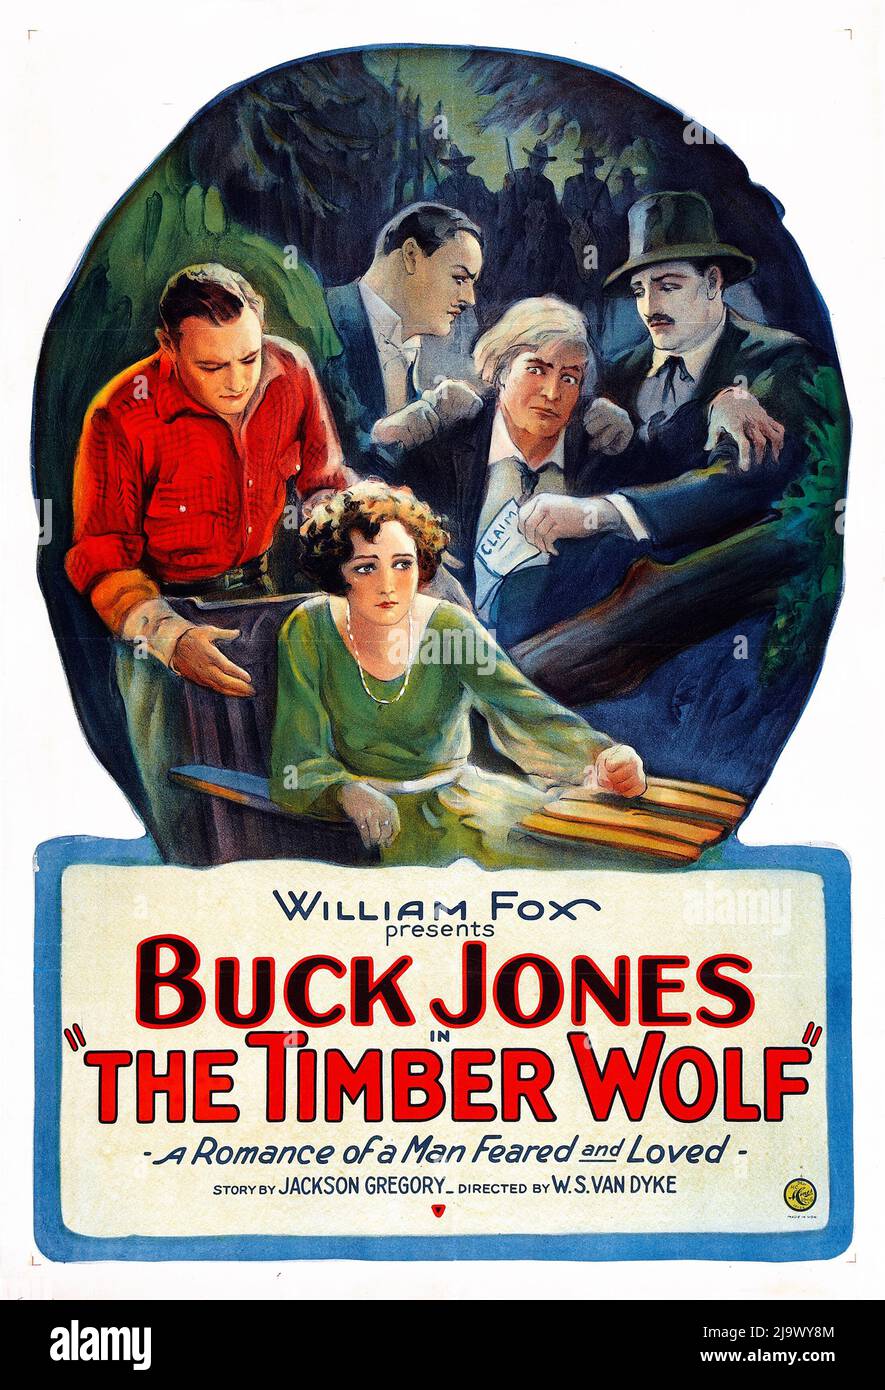 Buck Jones - Vintage movie poster for the 1925 American silent Western film The Timber Wolf. Stock Photo